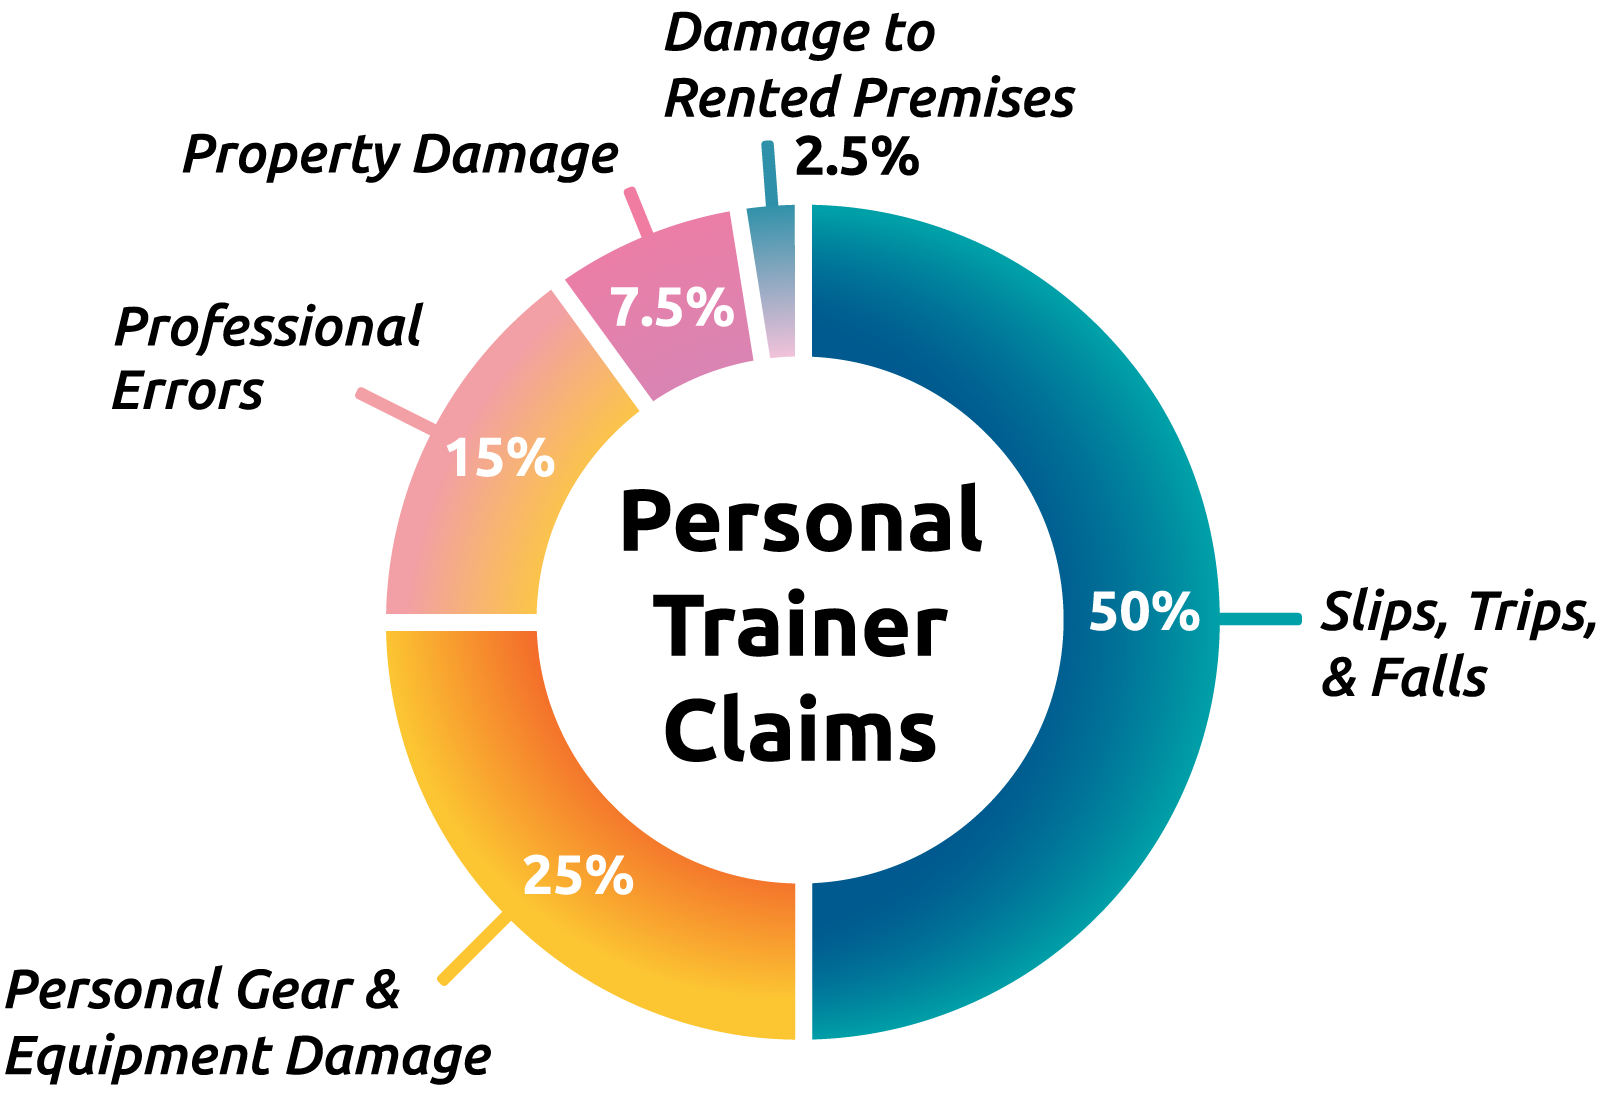 Types of Personal Trainer Insurance Claims